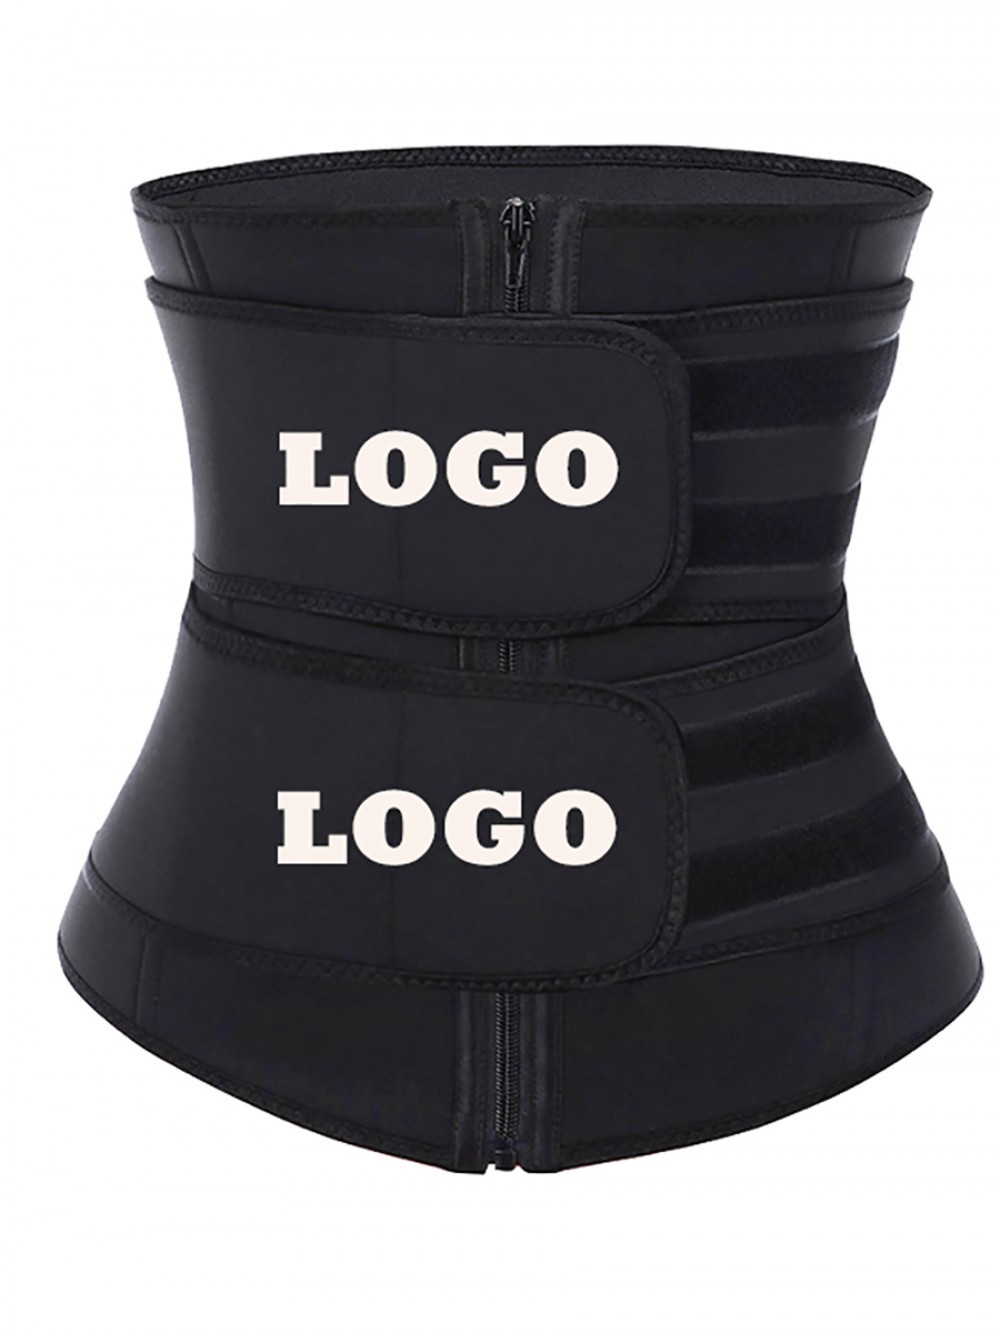 Double Belt Black Big Size Latex Waist Trainer For Loss Weight: 